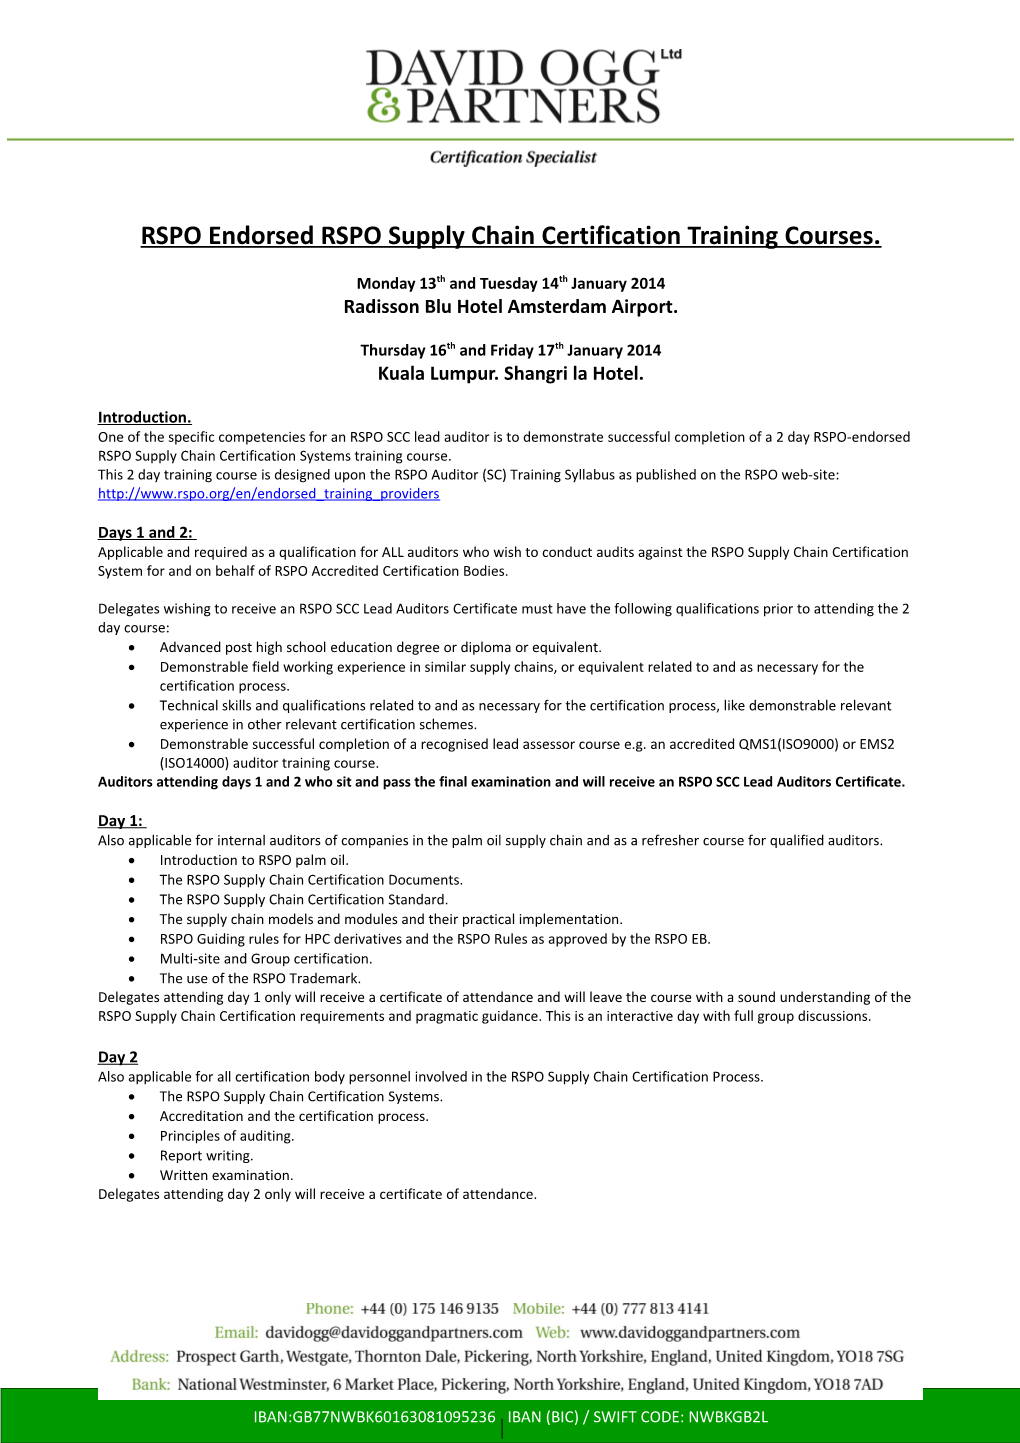 RSPO Endorsed RSPO Supply Chain Certification Training Courses